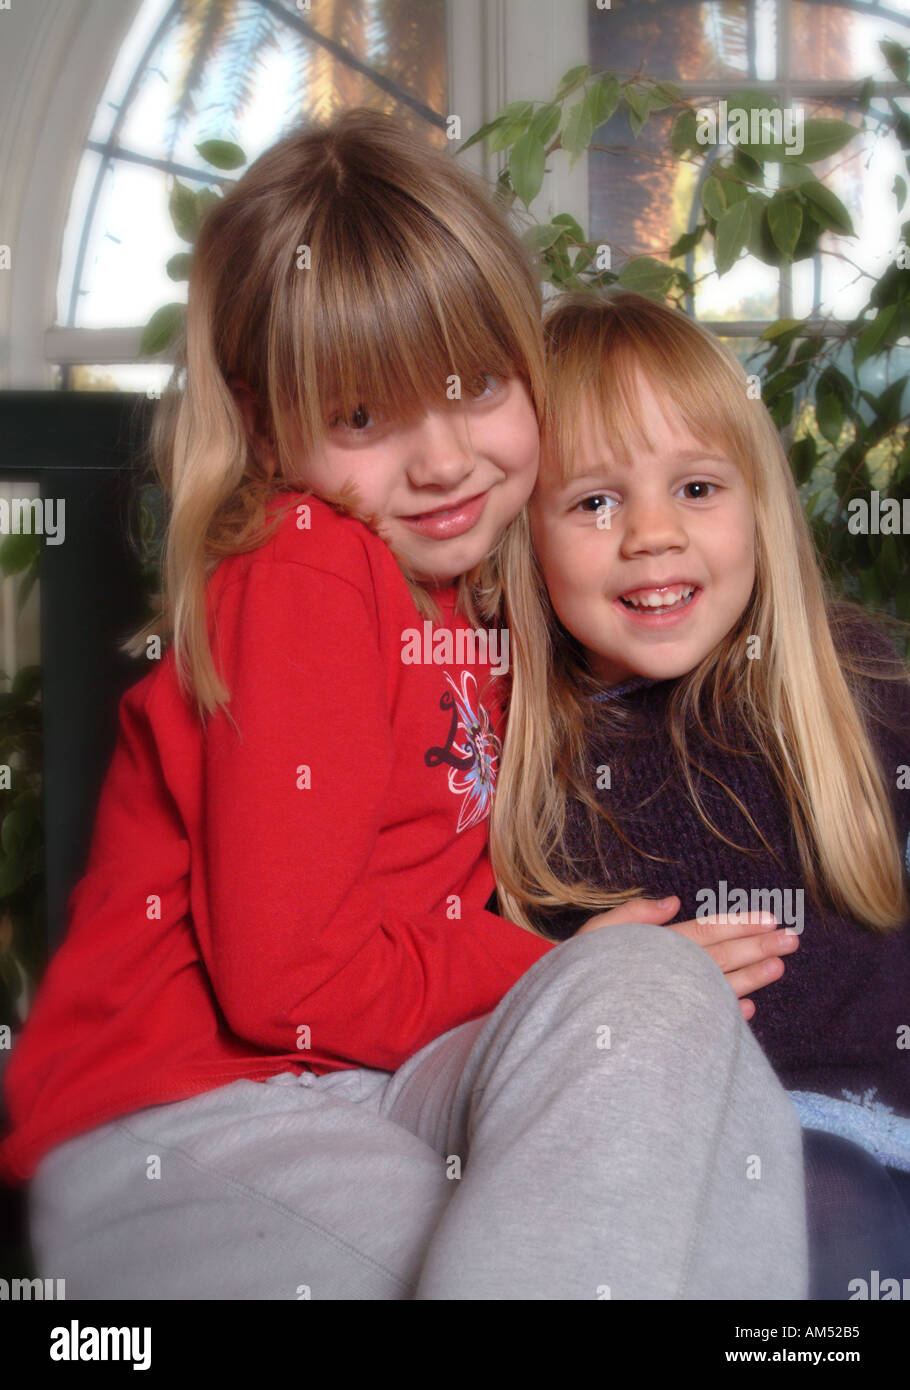 two young blond girls who are best friends pose for a portrait. Stock Photo